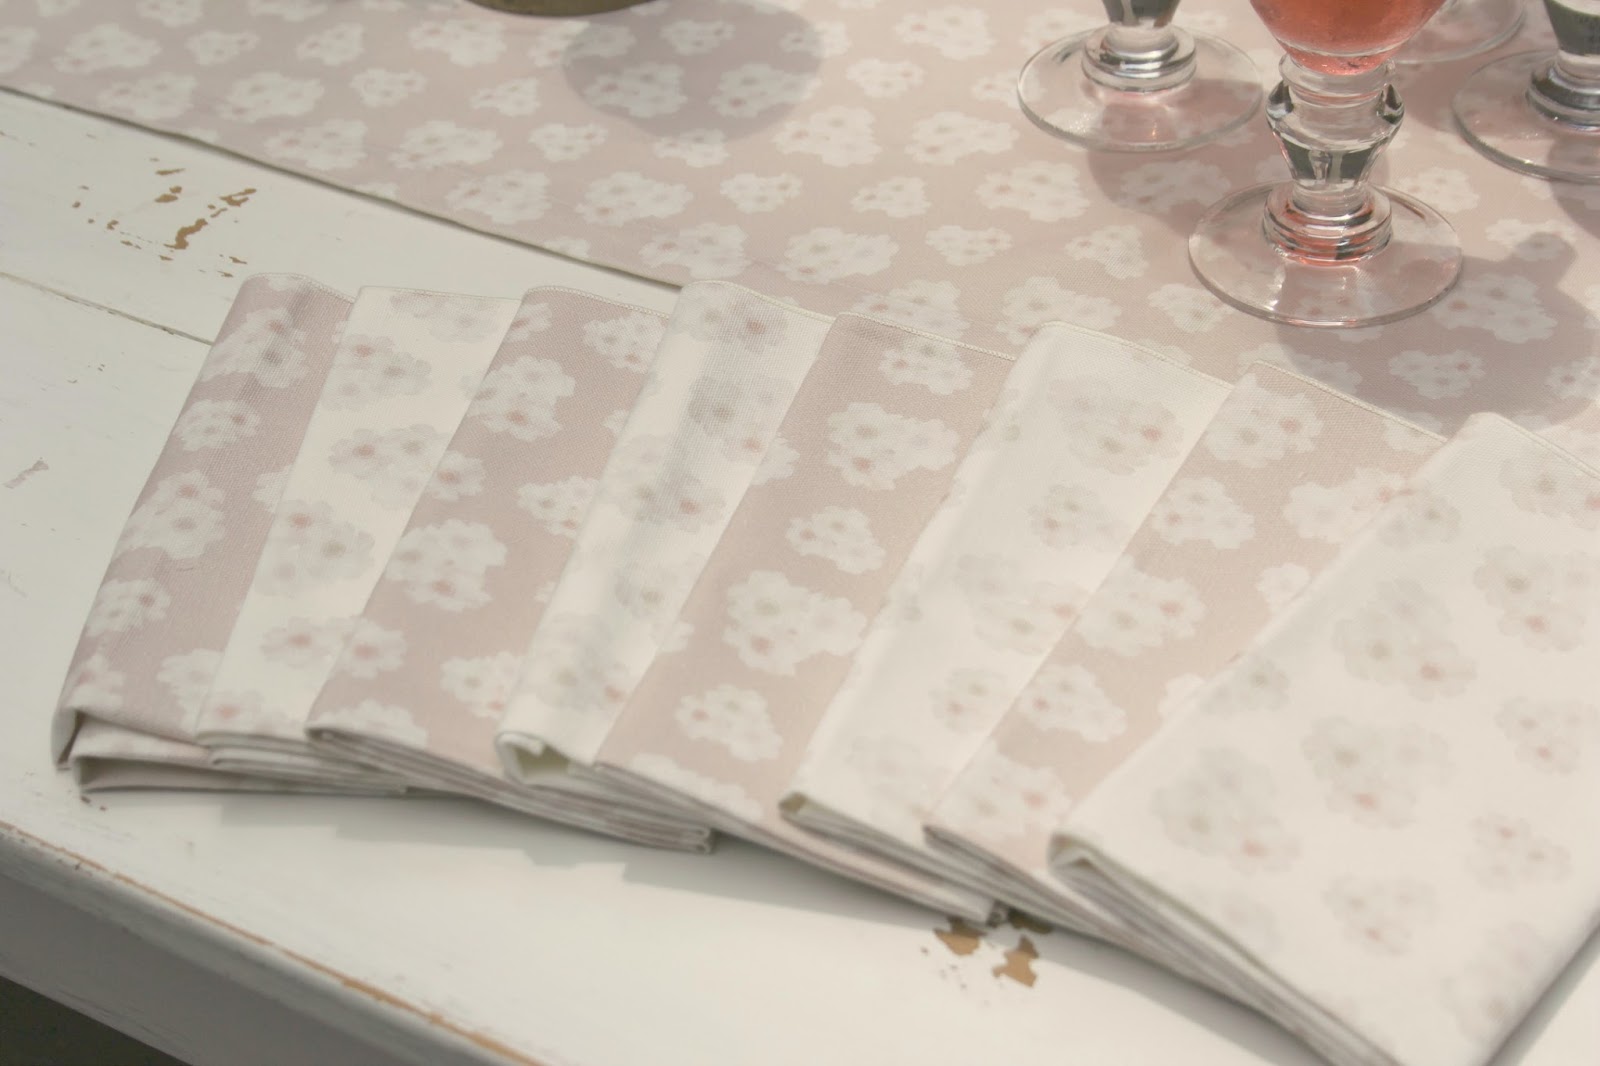 Polka dot peonies blush pink napkins and table runner from Minted - Hello Lovely Studio